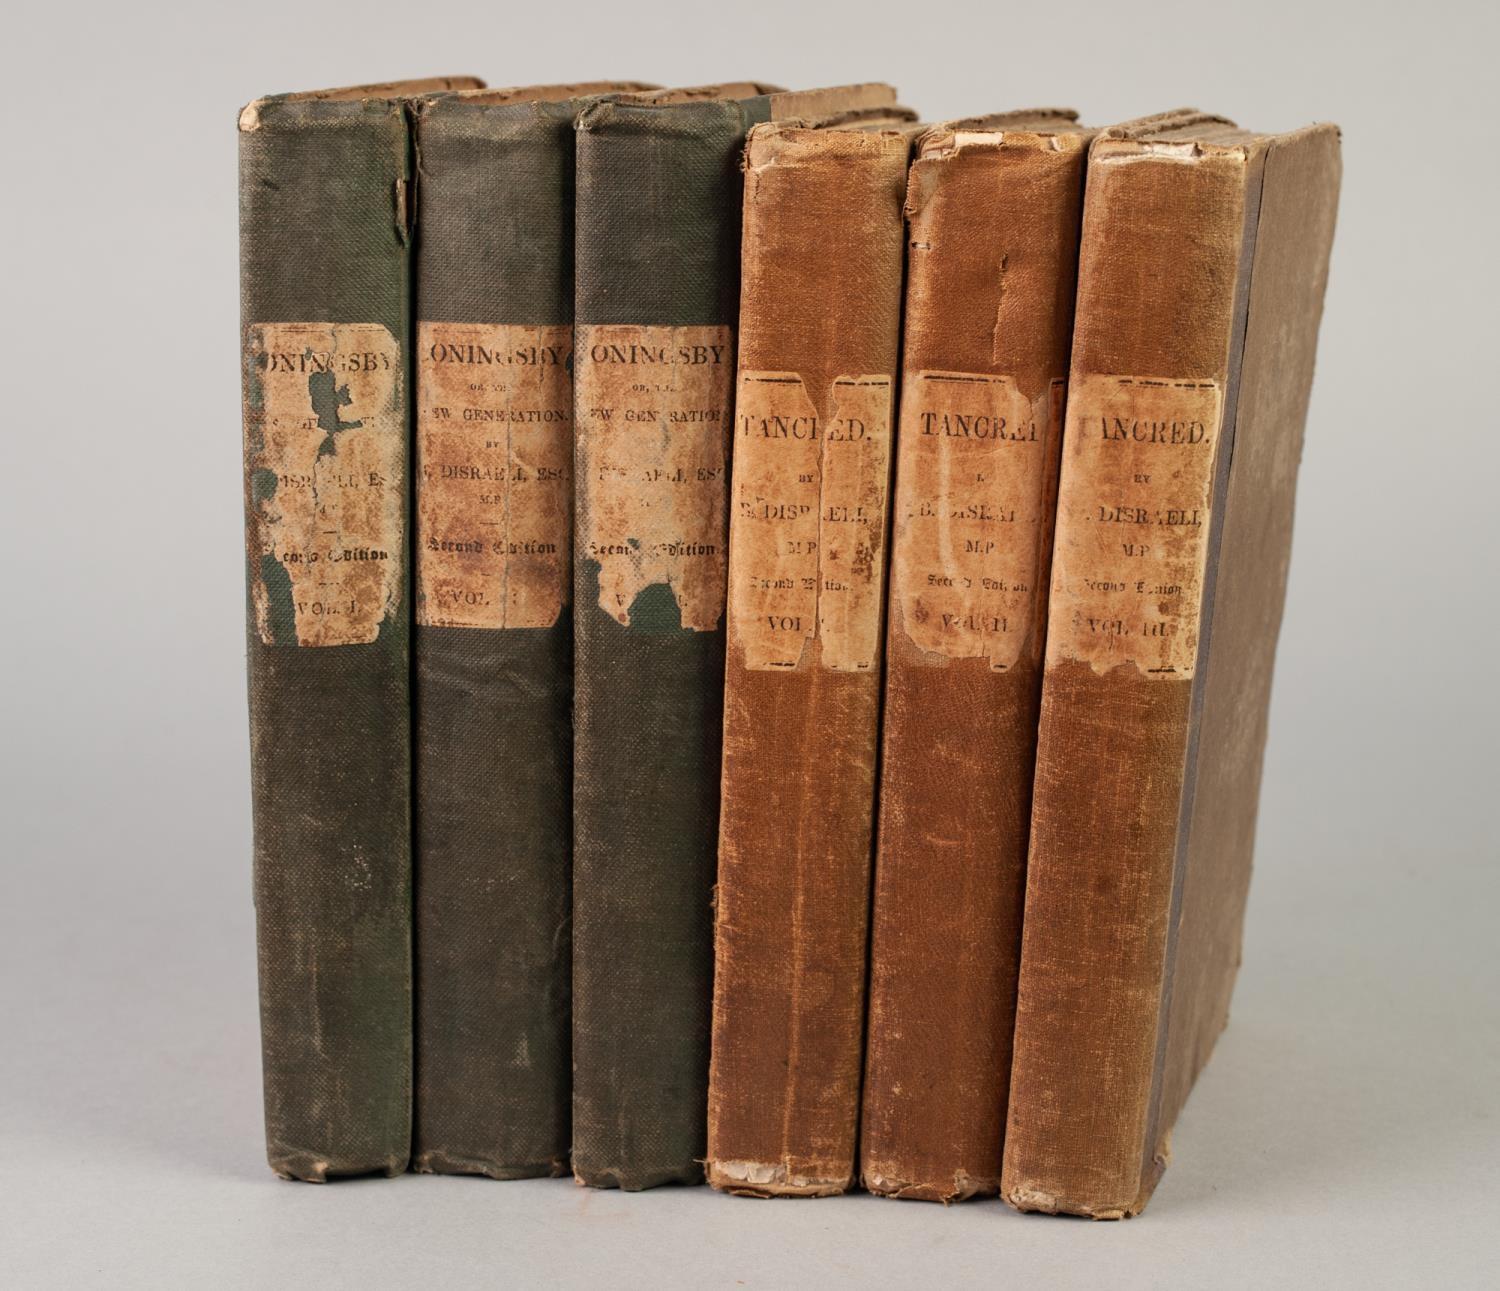 B DISRAELI, TANCRED AND THE NEW CRUSADE, 3 volumes, published Henry Colburn, 1847, second edition,